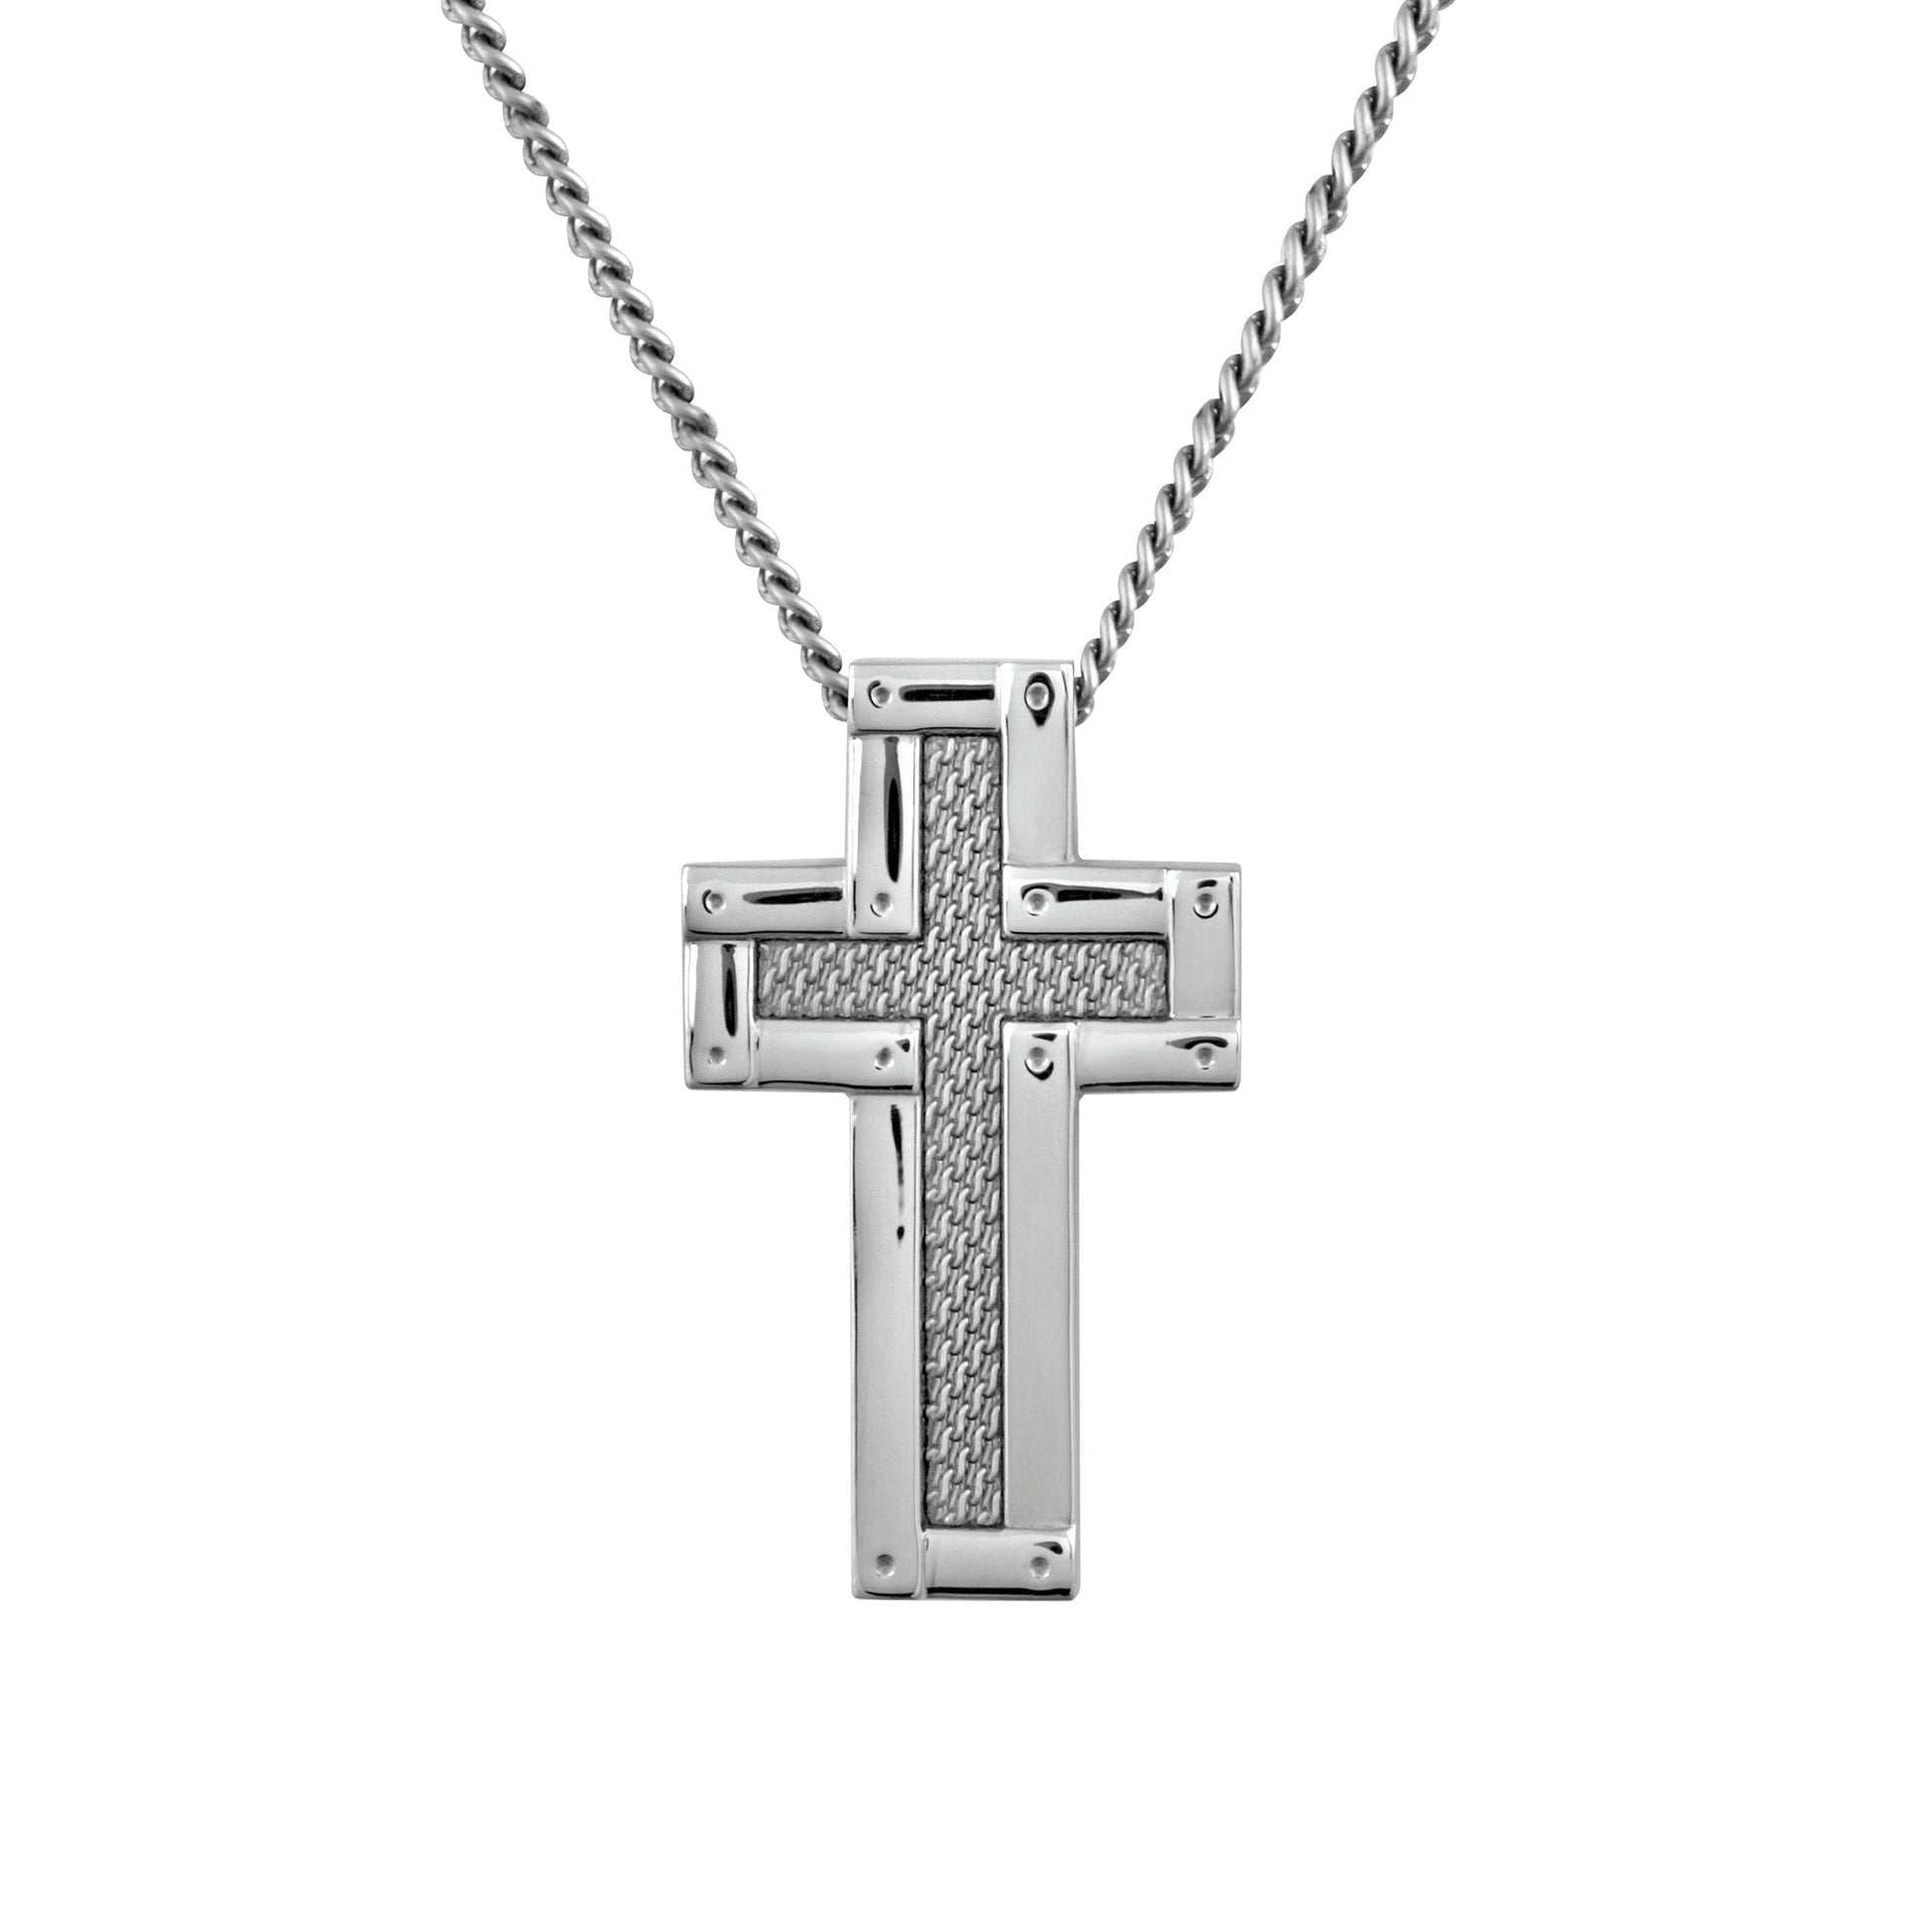 A stainless steel mesh accent cross necklace on 24" chain displayed on a neutral white background.